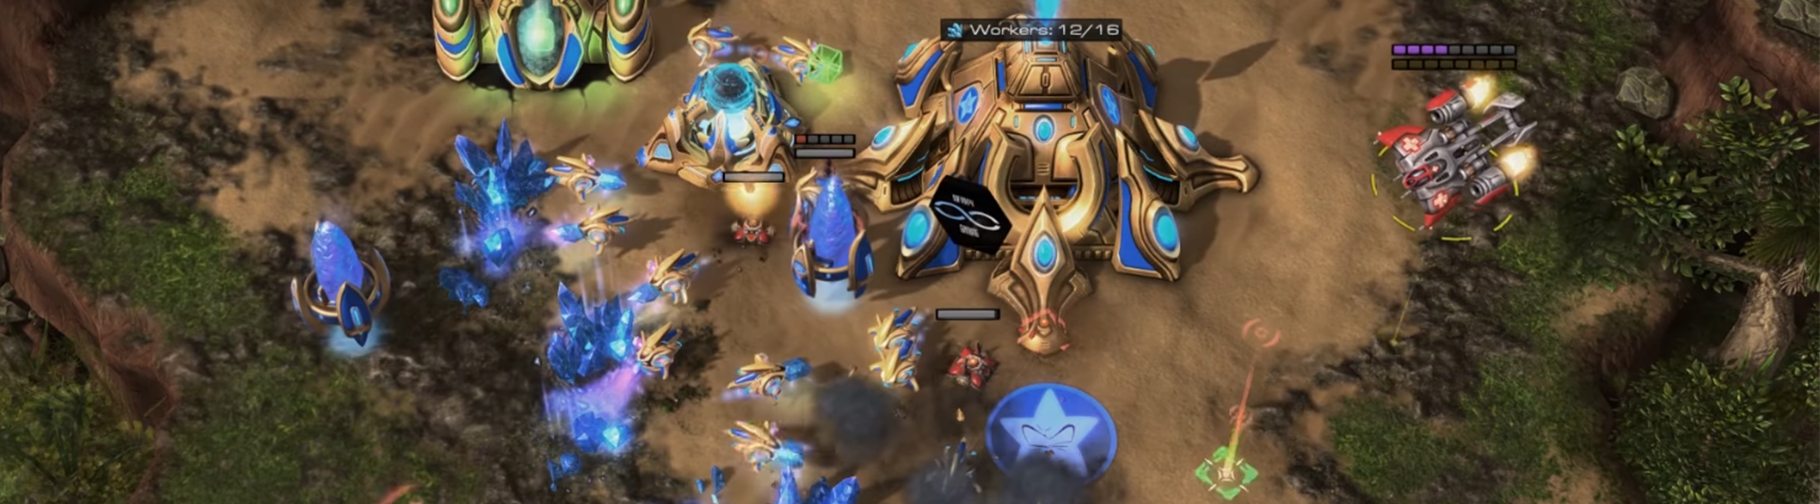 Starcraft 2 widow mines about to explode on Protoss probes